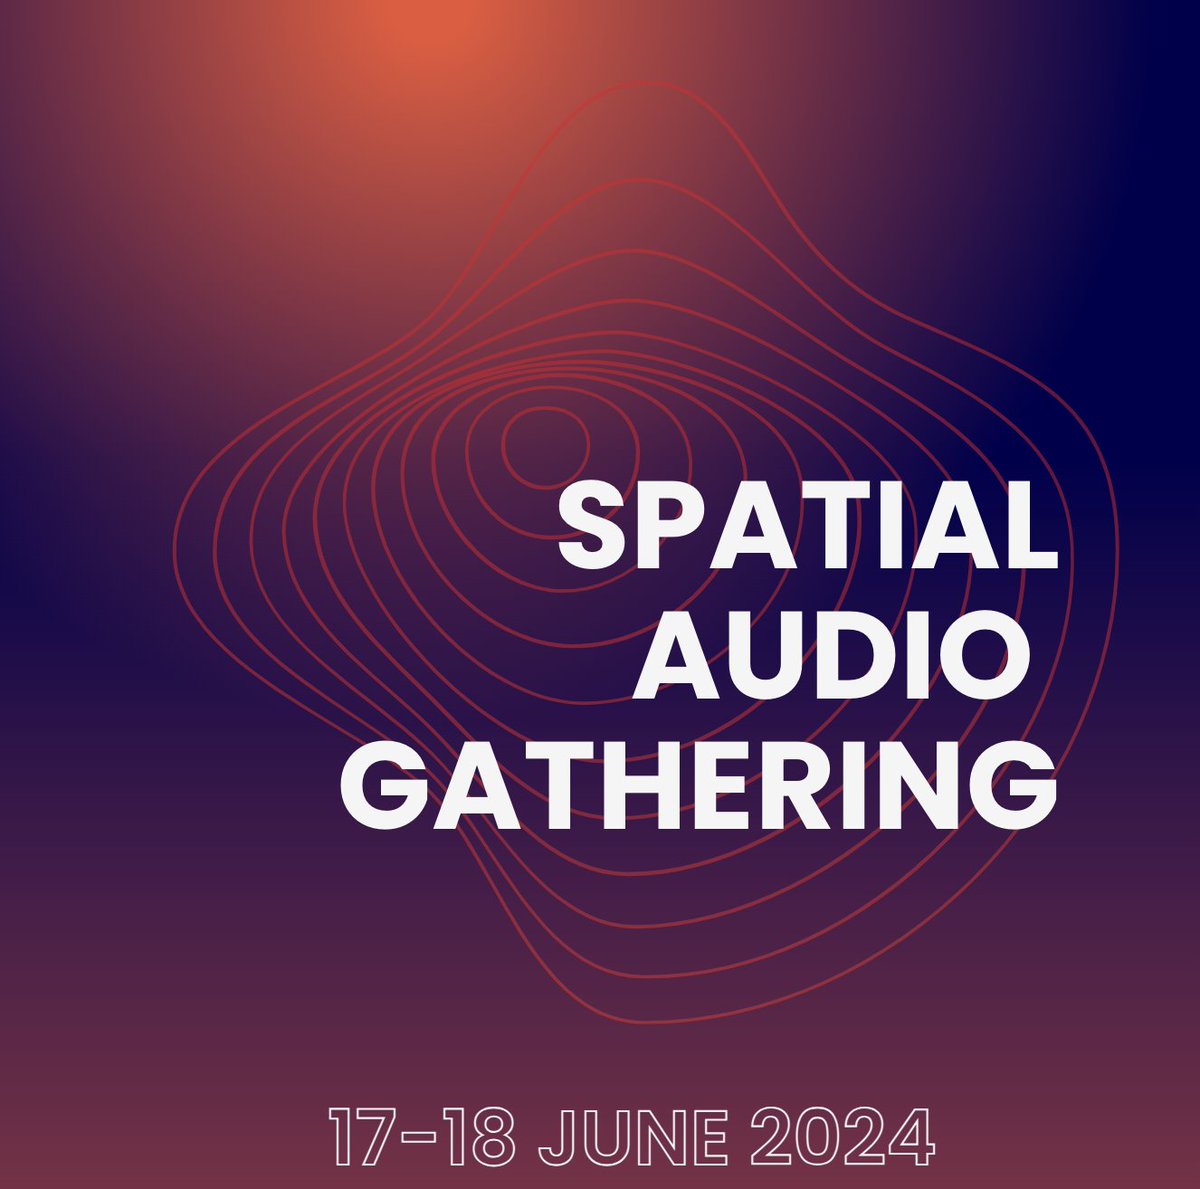 Dr Brona Martin is a Keynote Presenter at the upcoming 'Spatial Audio Gathering' hosted at De Montfort University, Leicester from 17-18 June 2024. If you fancy attending, or applying to the call for works and papers, here is the link to find out more ➡️ linktr.ee/spatialaudioga…